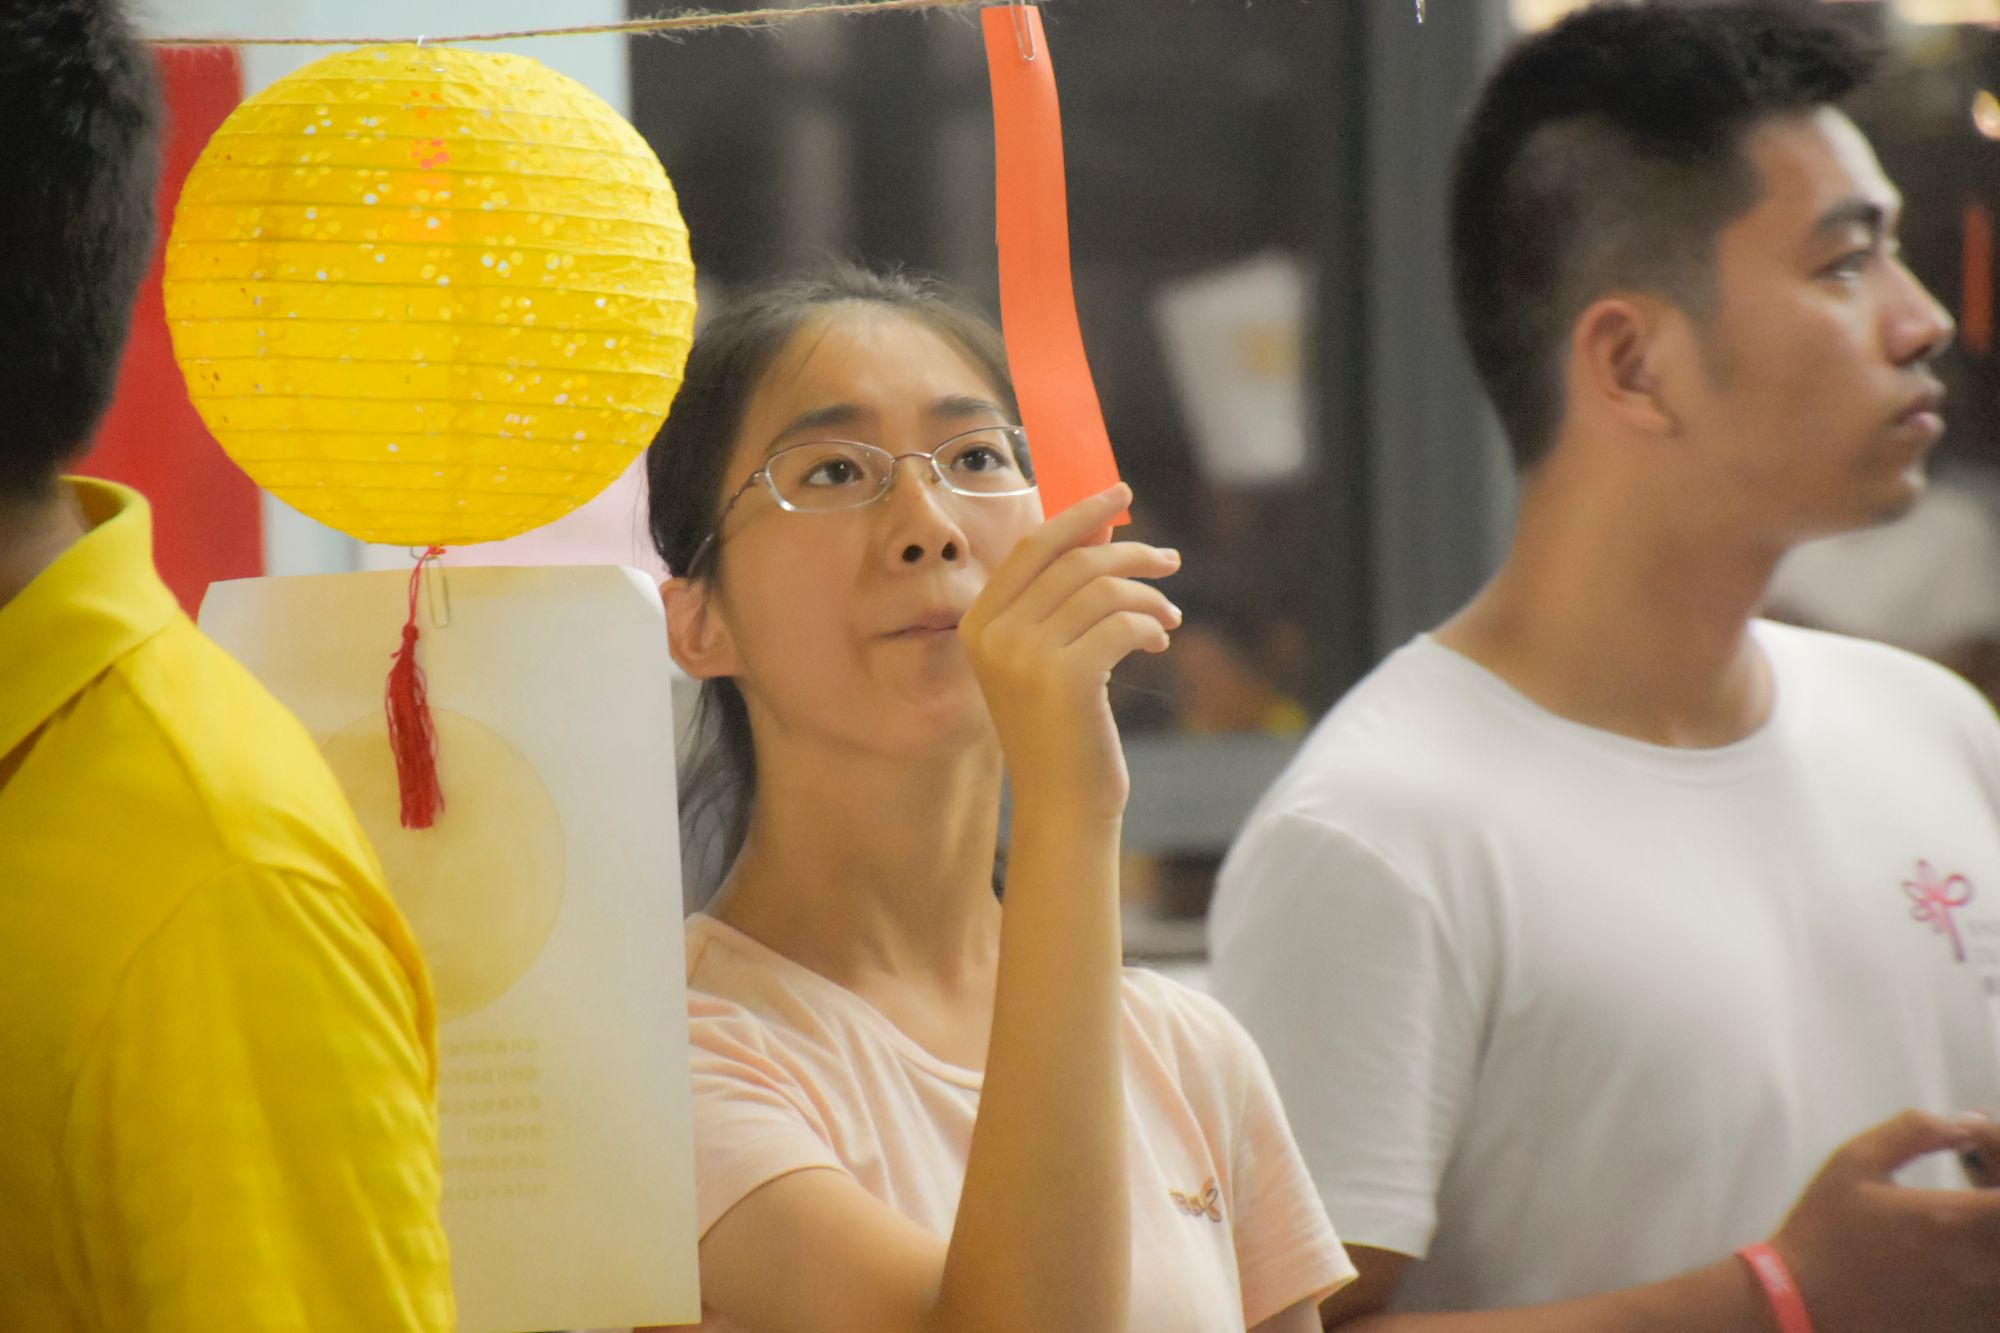 Colorful activities at SUSTech to celebrate the Mid-Autumn Festival